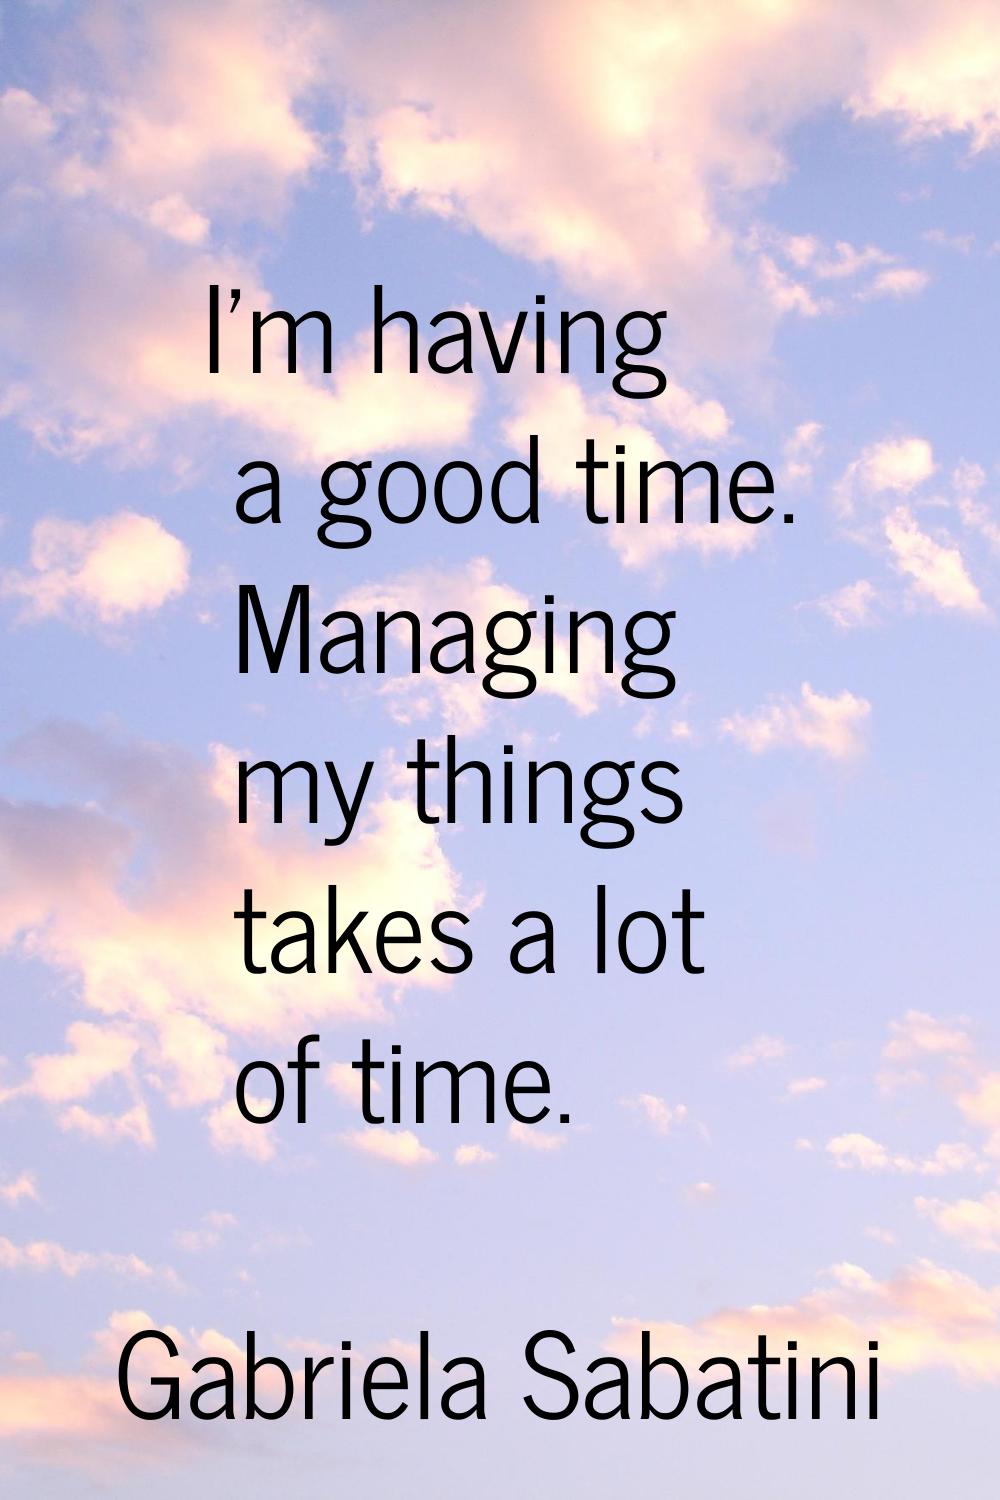 I'm having a good time. Managing my things takes a lot of time.